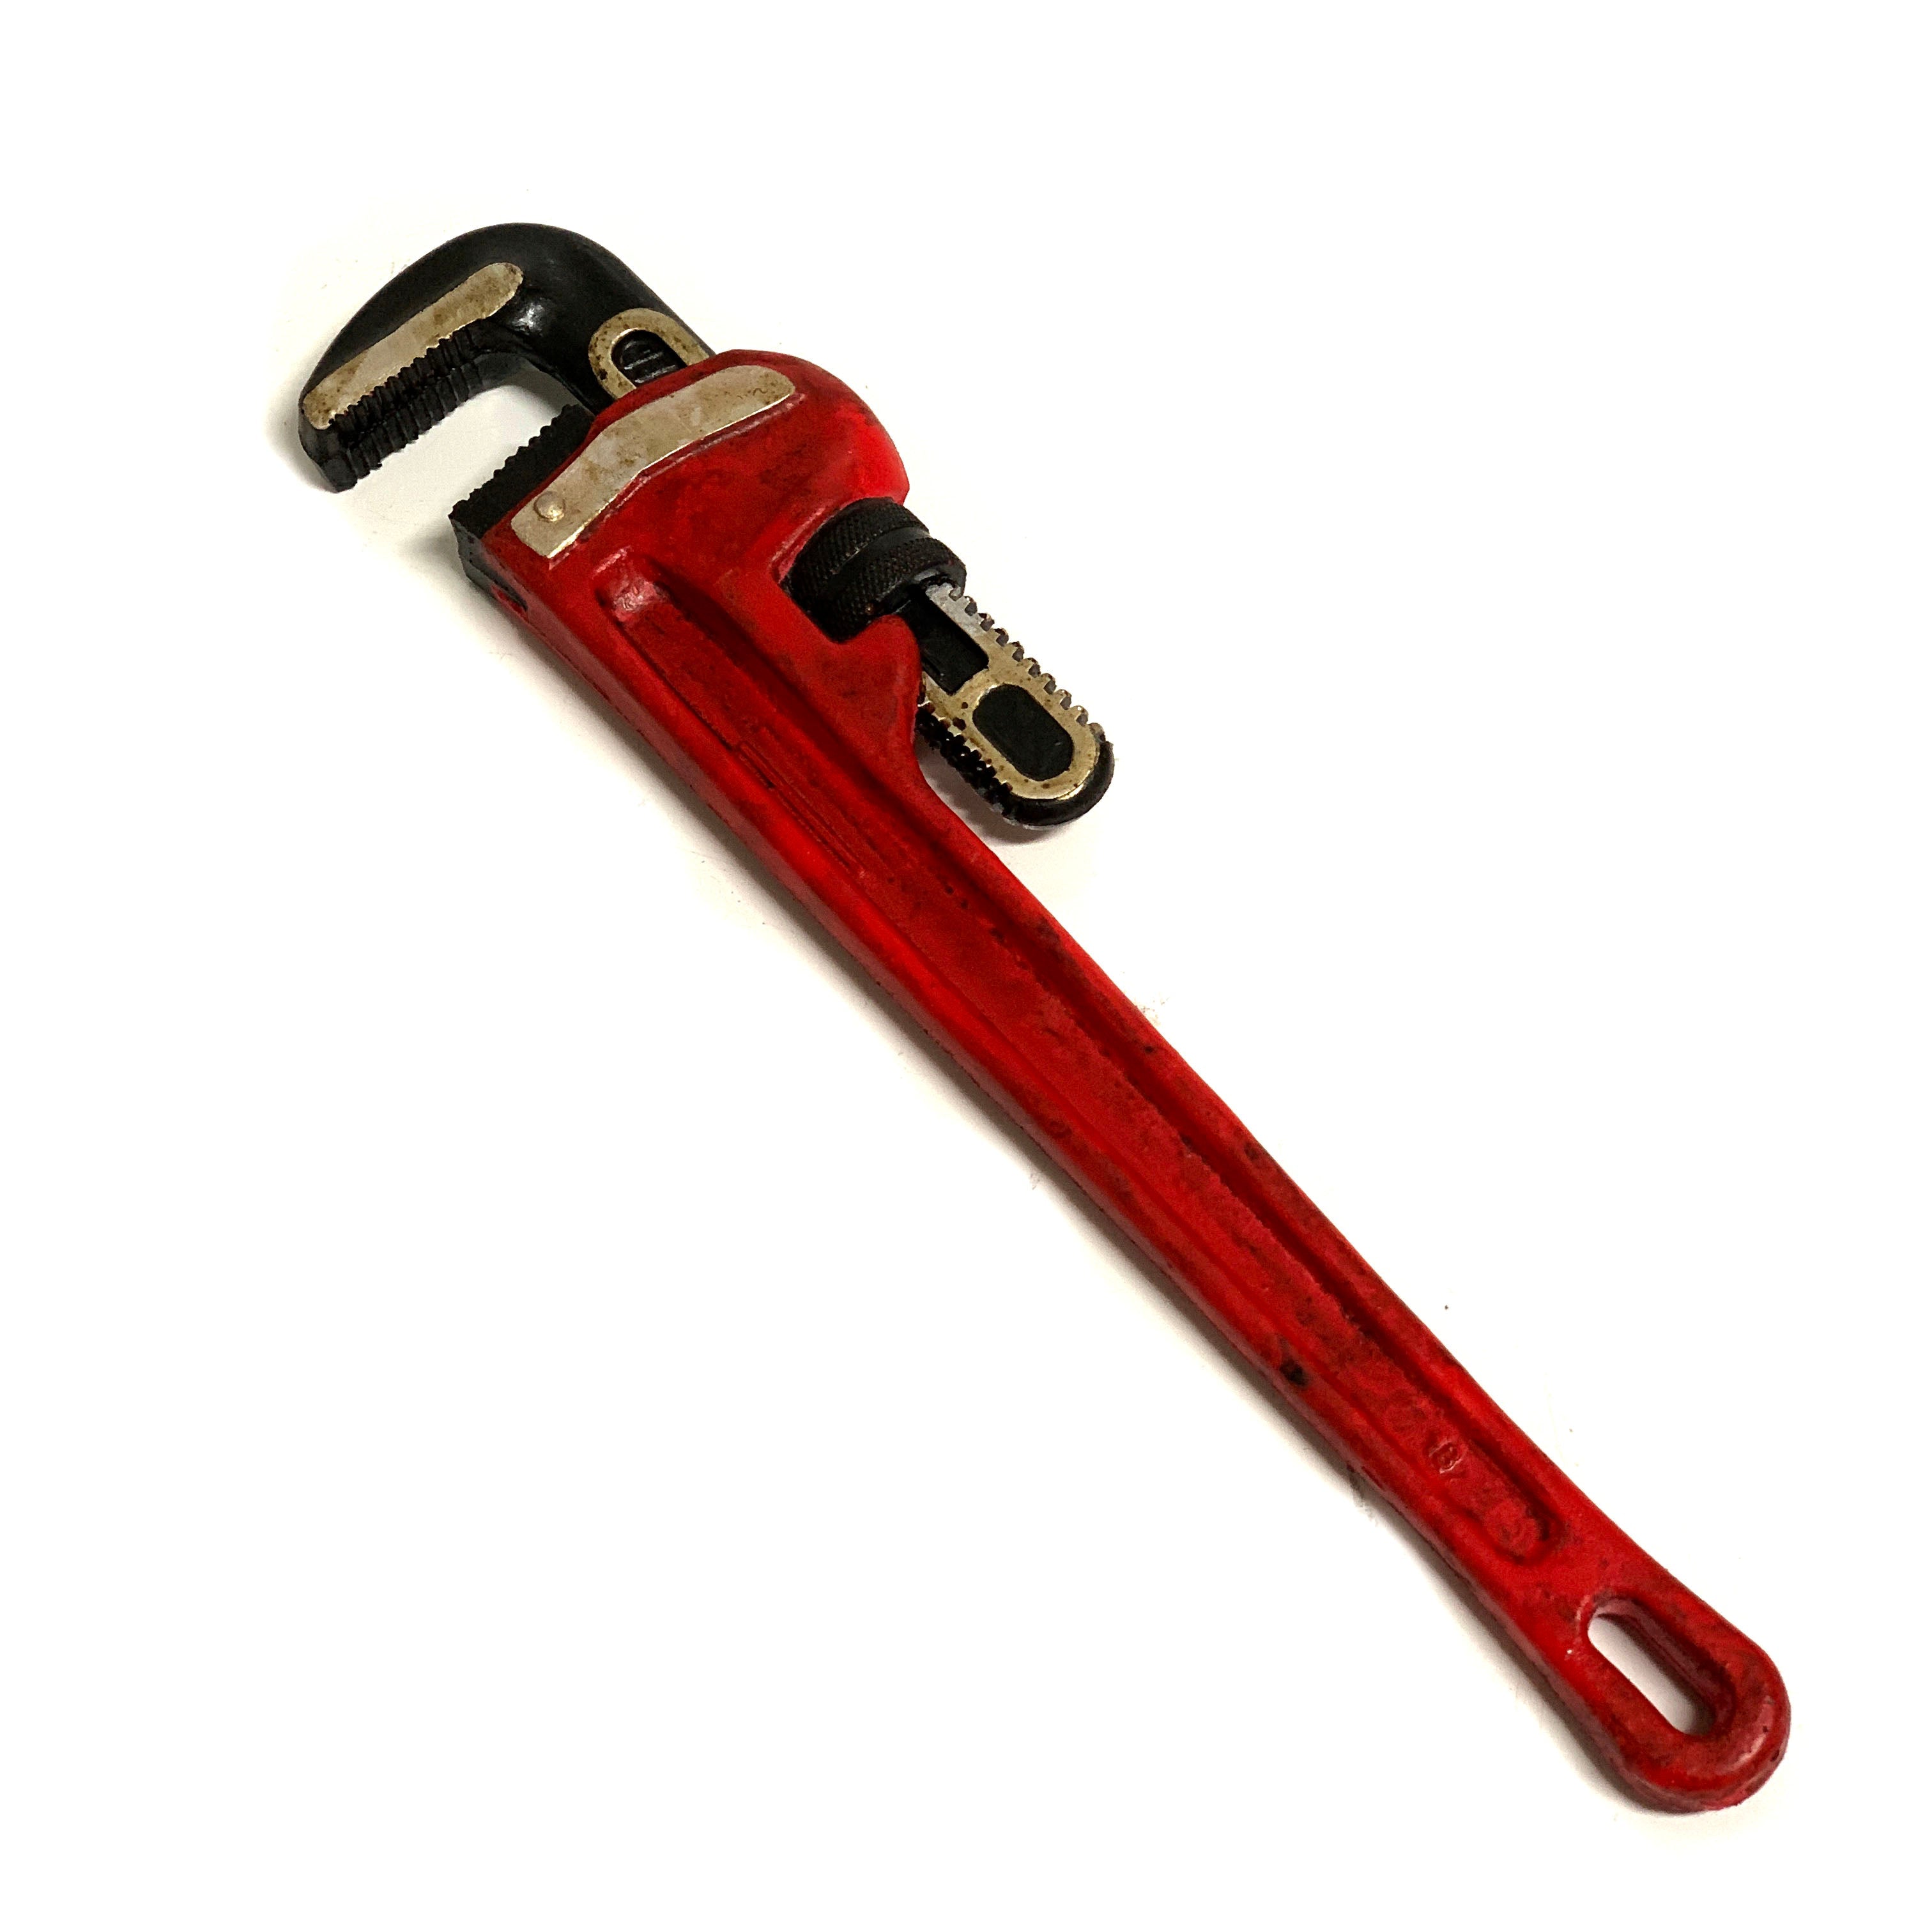 Foam Rubber Stunt 18 Inch Pipe Wrench Prop - New